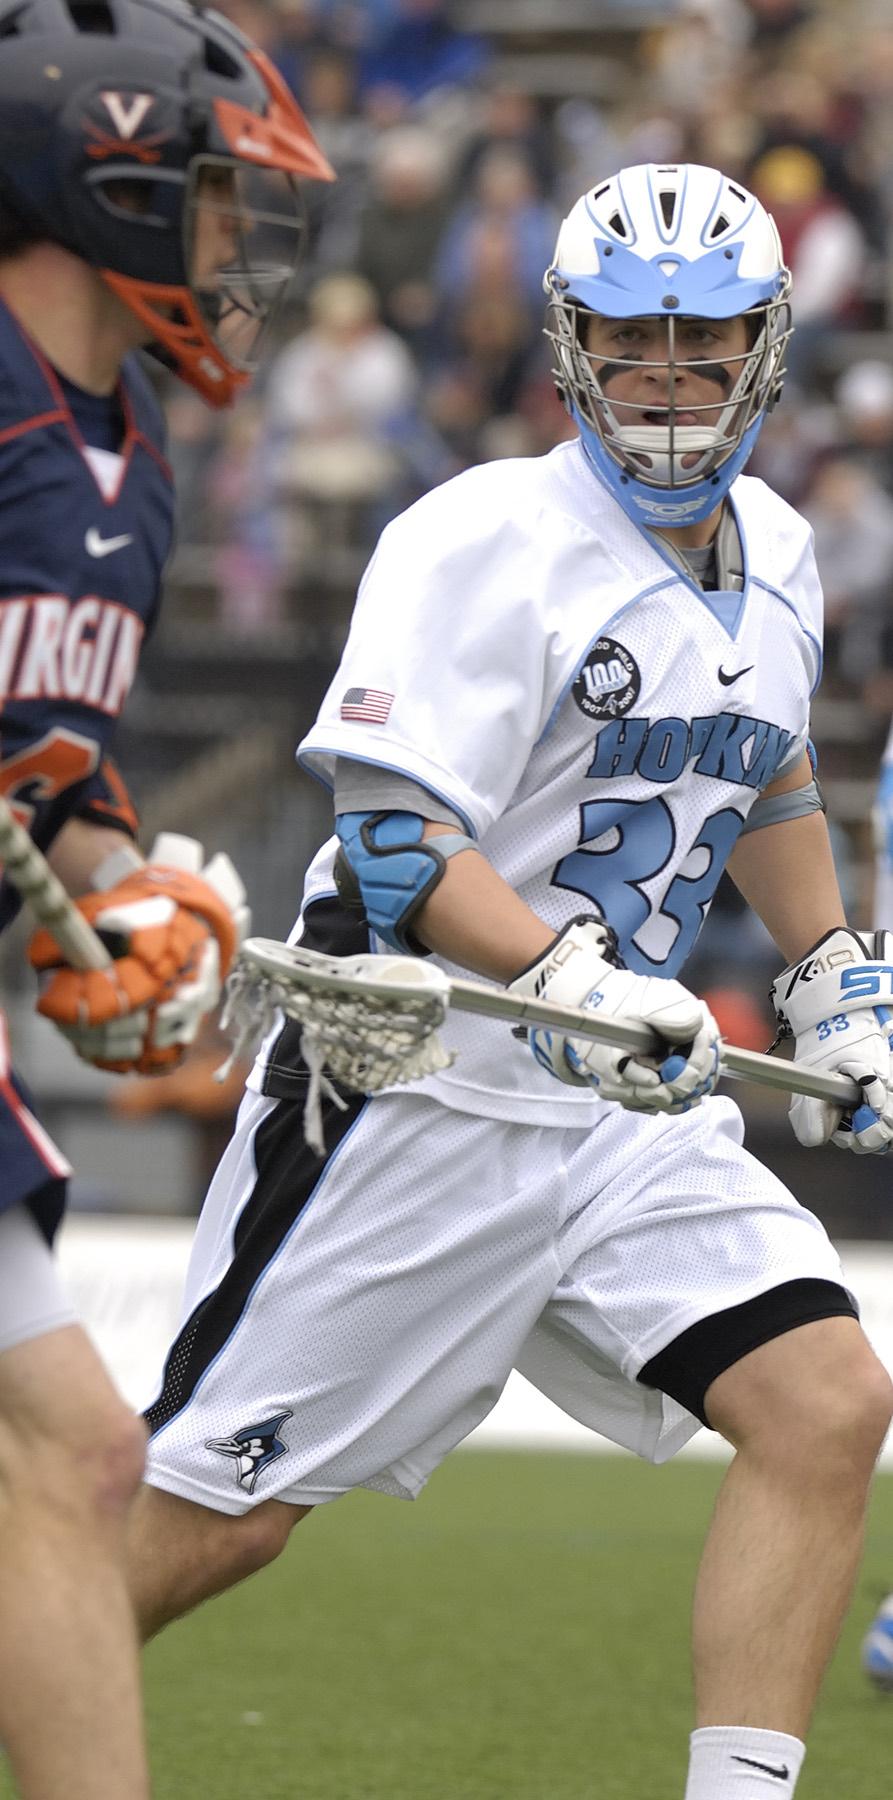 Position Tradition - Defense Johns Hopkins is coached by Dave Pietramala, who is generally regarded as the greatest defenseman in the history of college lacrosse.